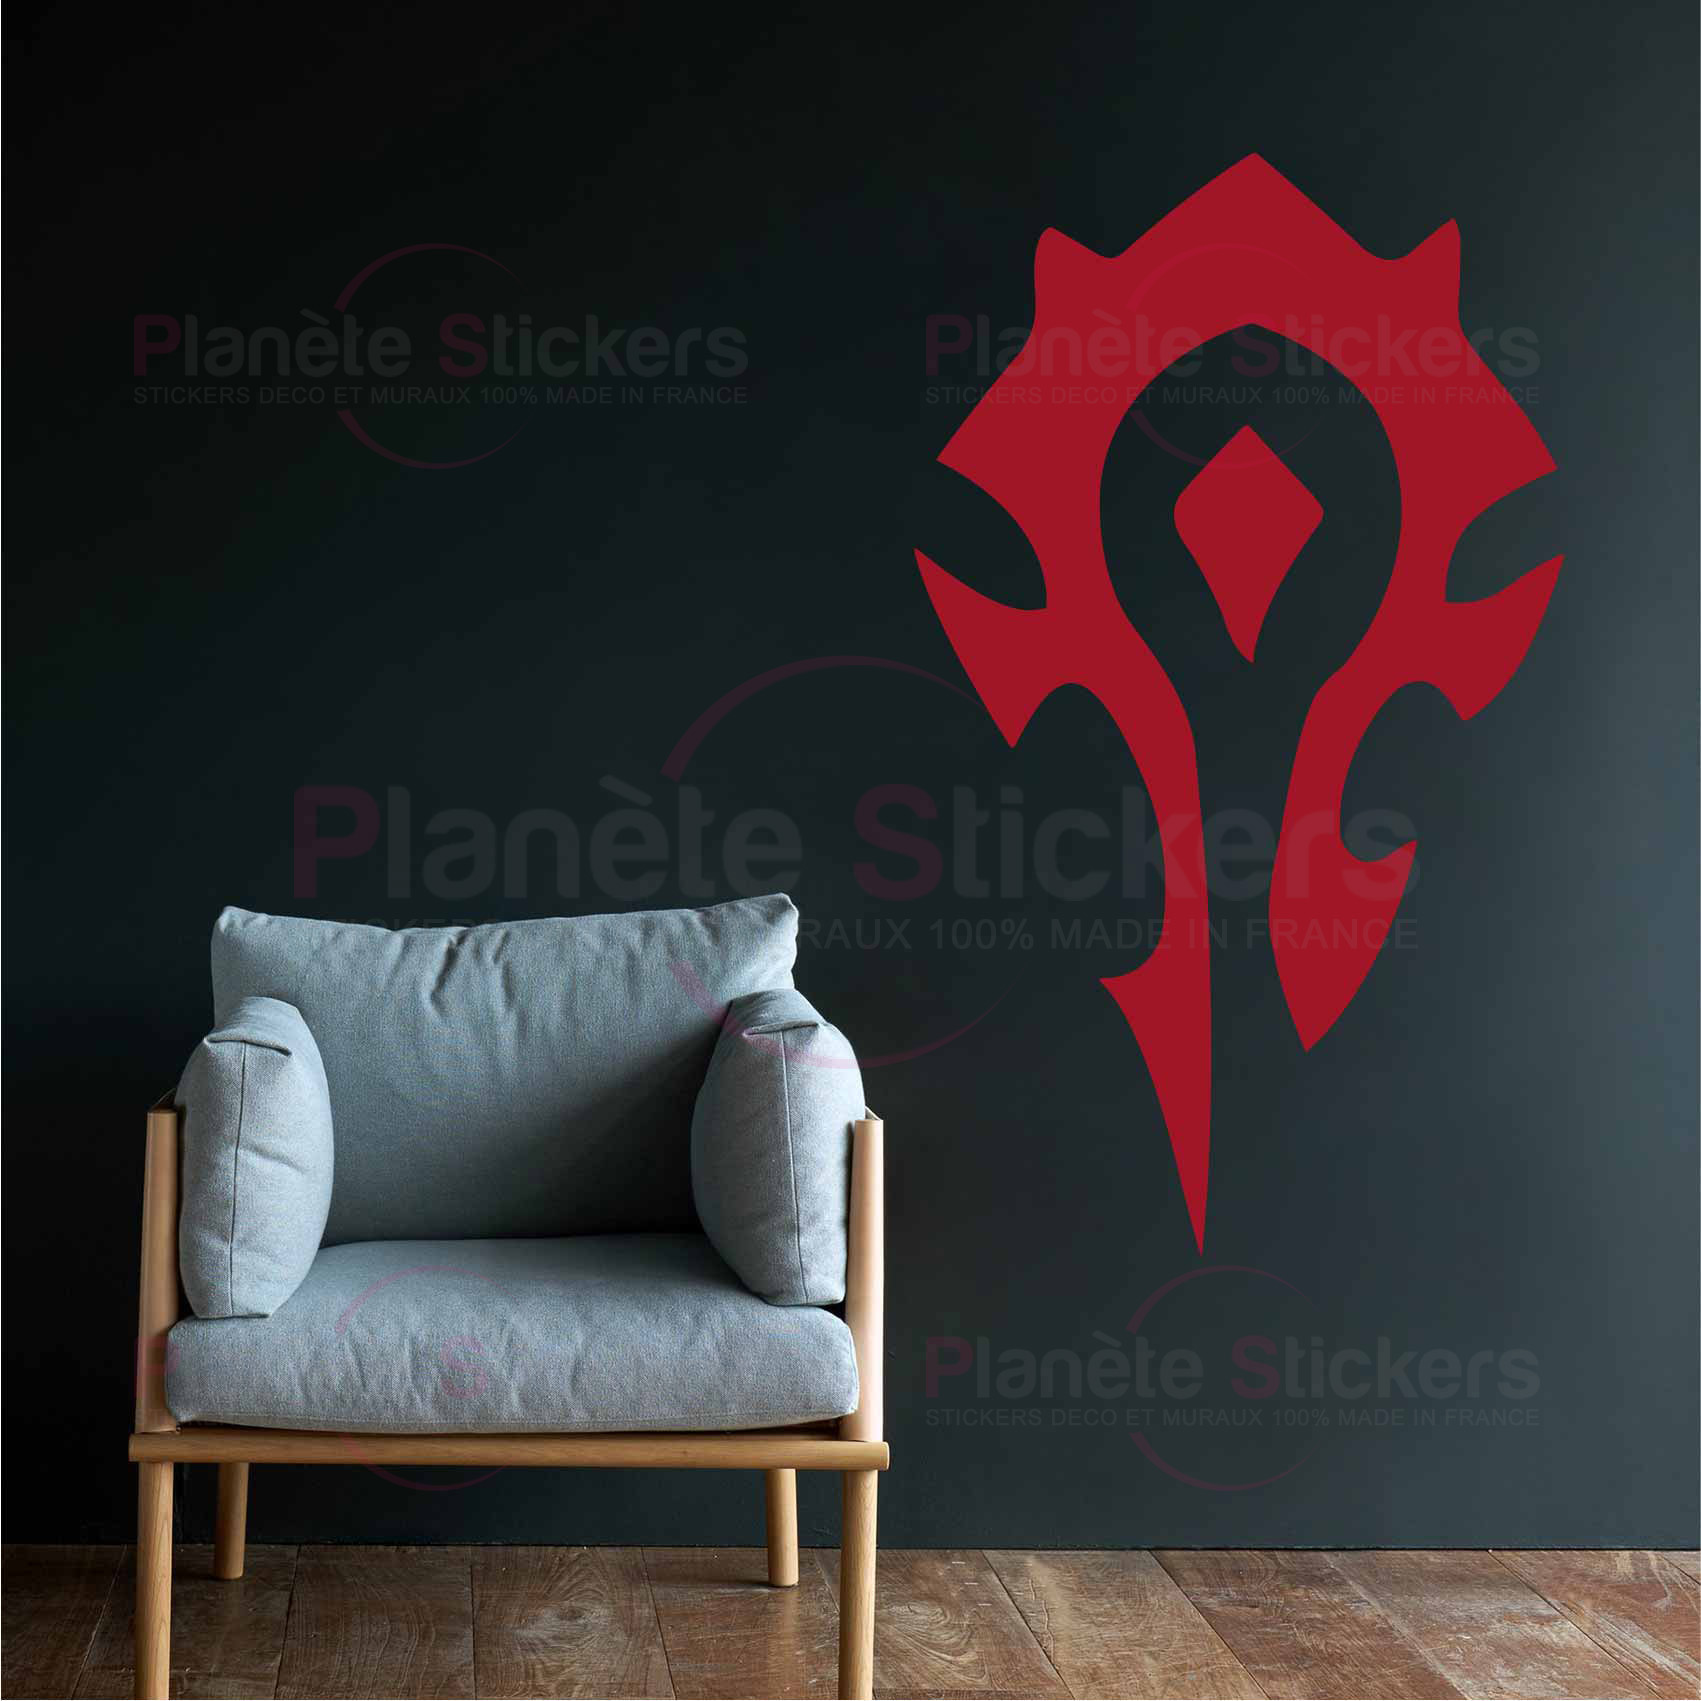 stickers-blason-horde-wow-ref16wow-stickers-muraux-world-of-warcraft-autocollant-mural-jeux-video-sticker-gamer-deco-gaming-salon-chambre